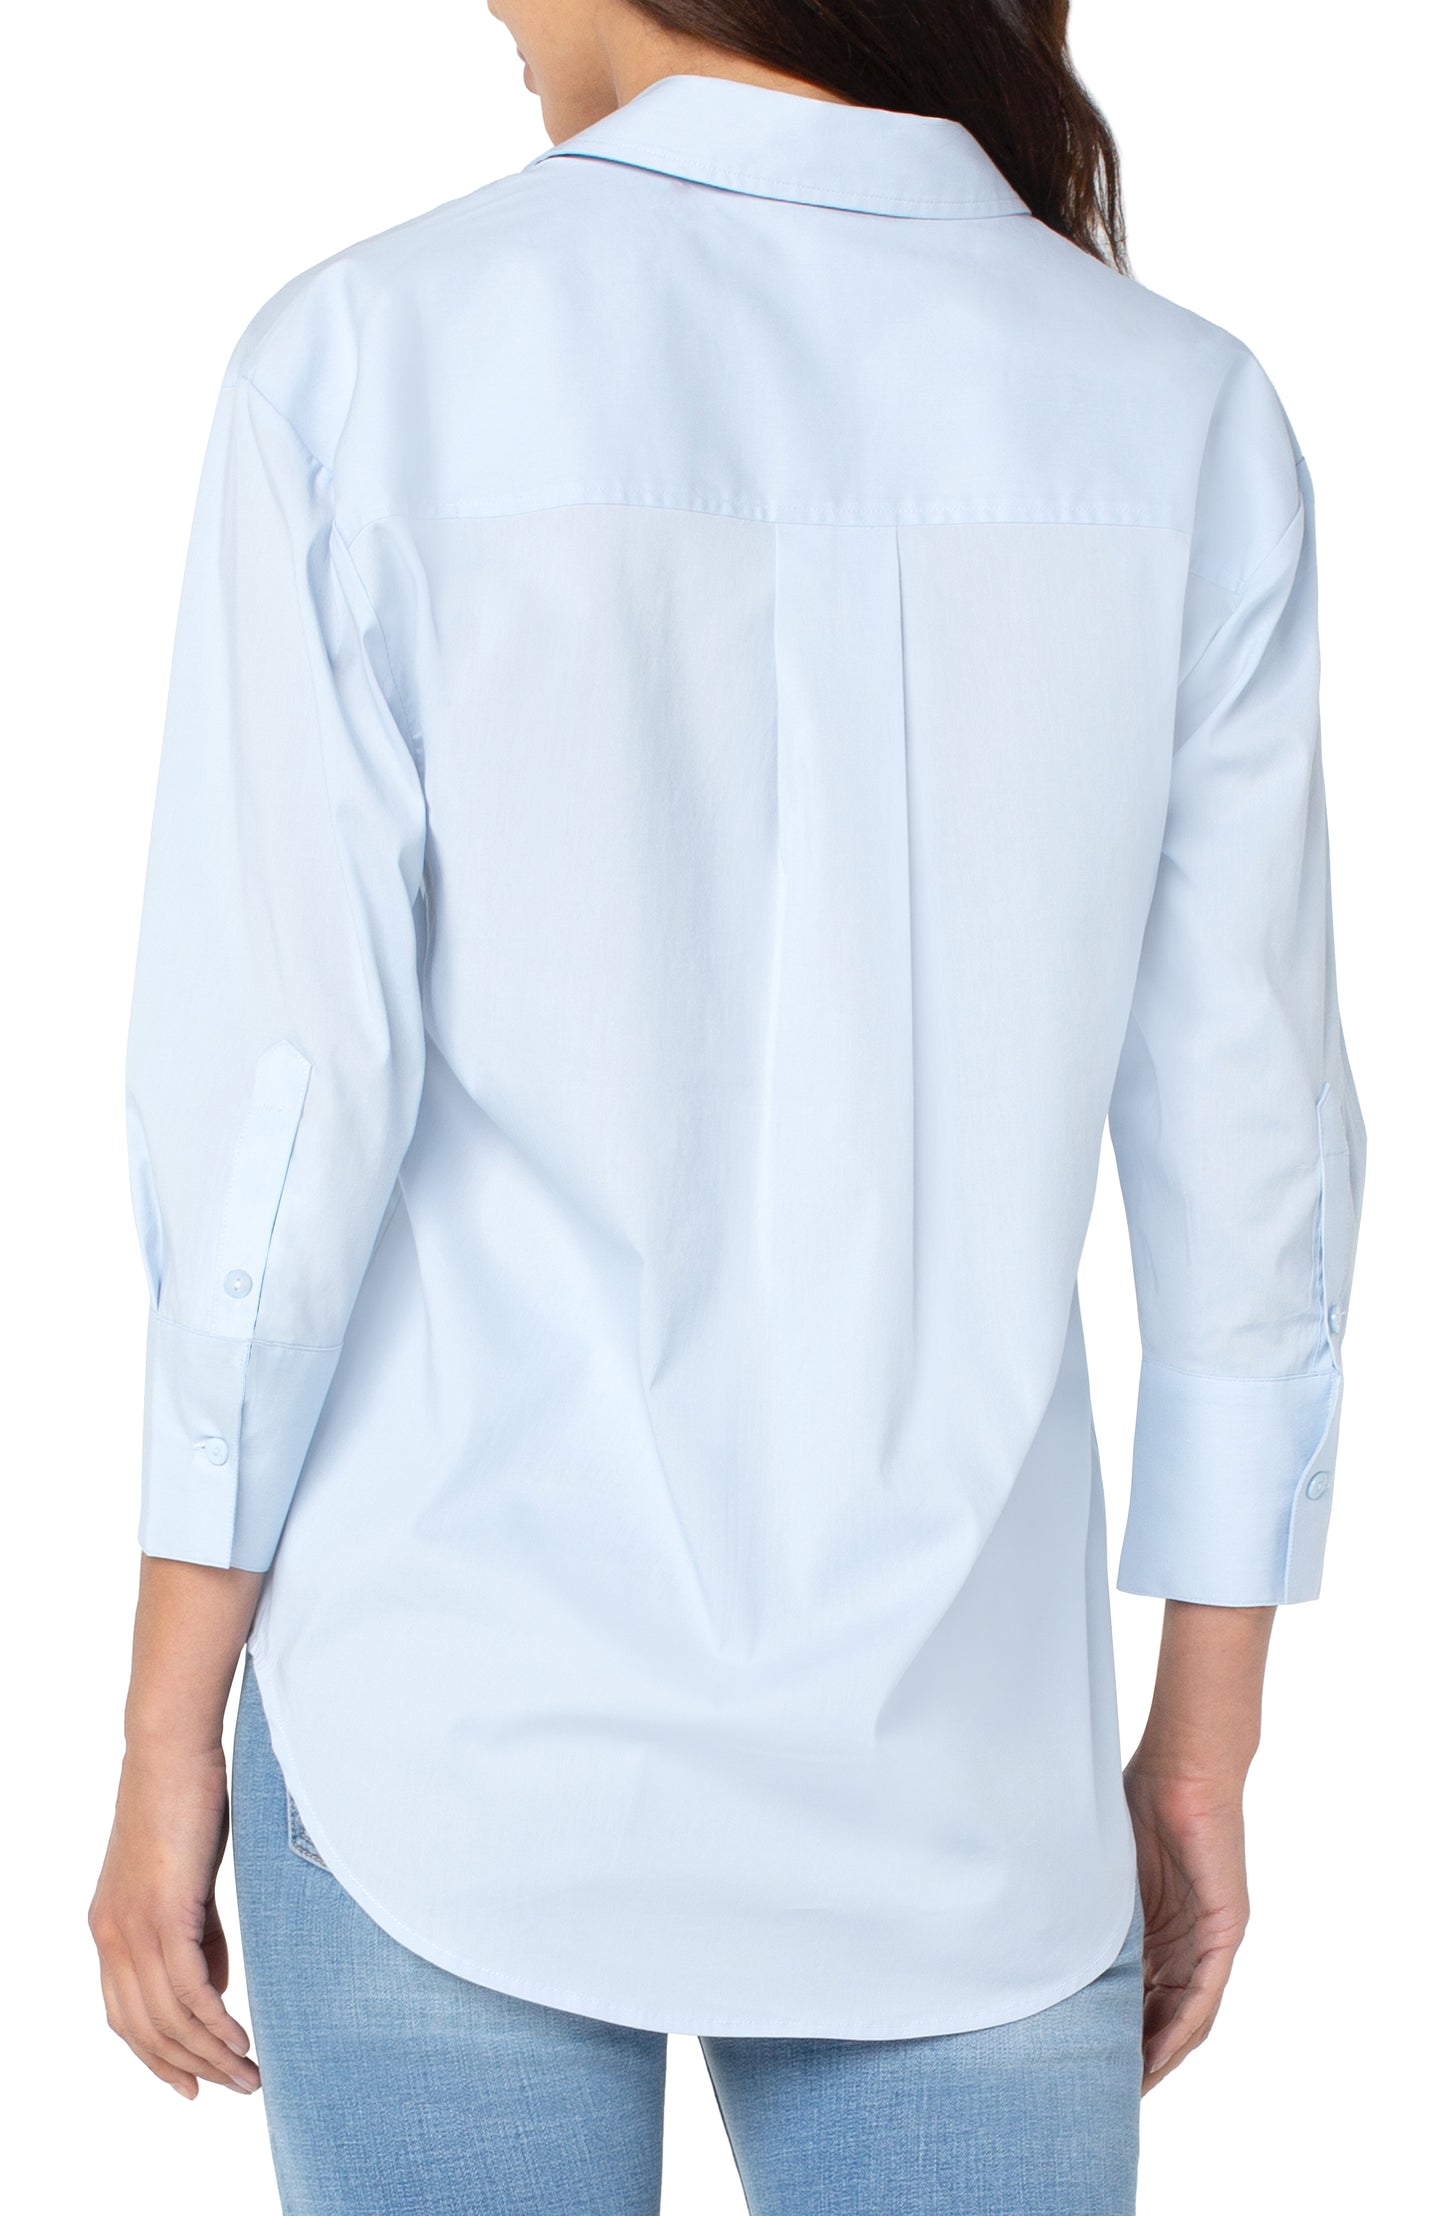 Liverpool - Oversized Classic Button Down Shirt